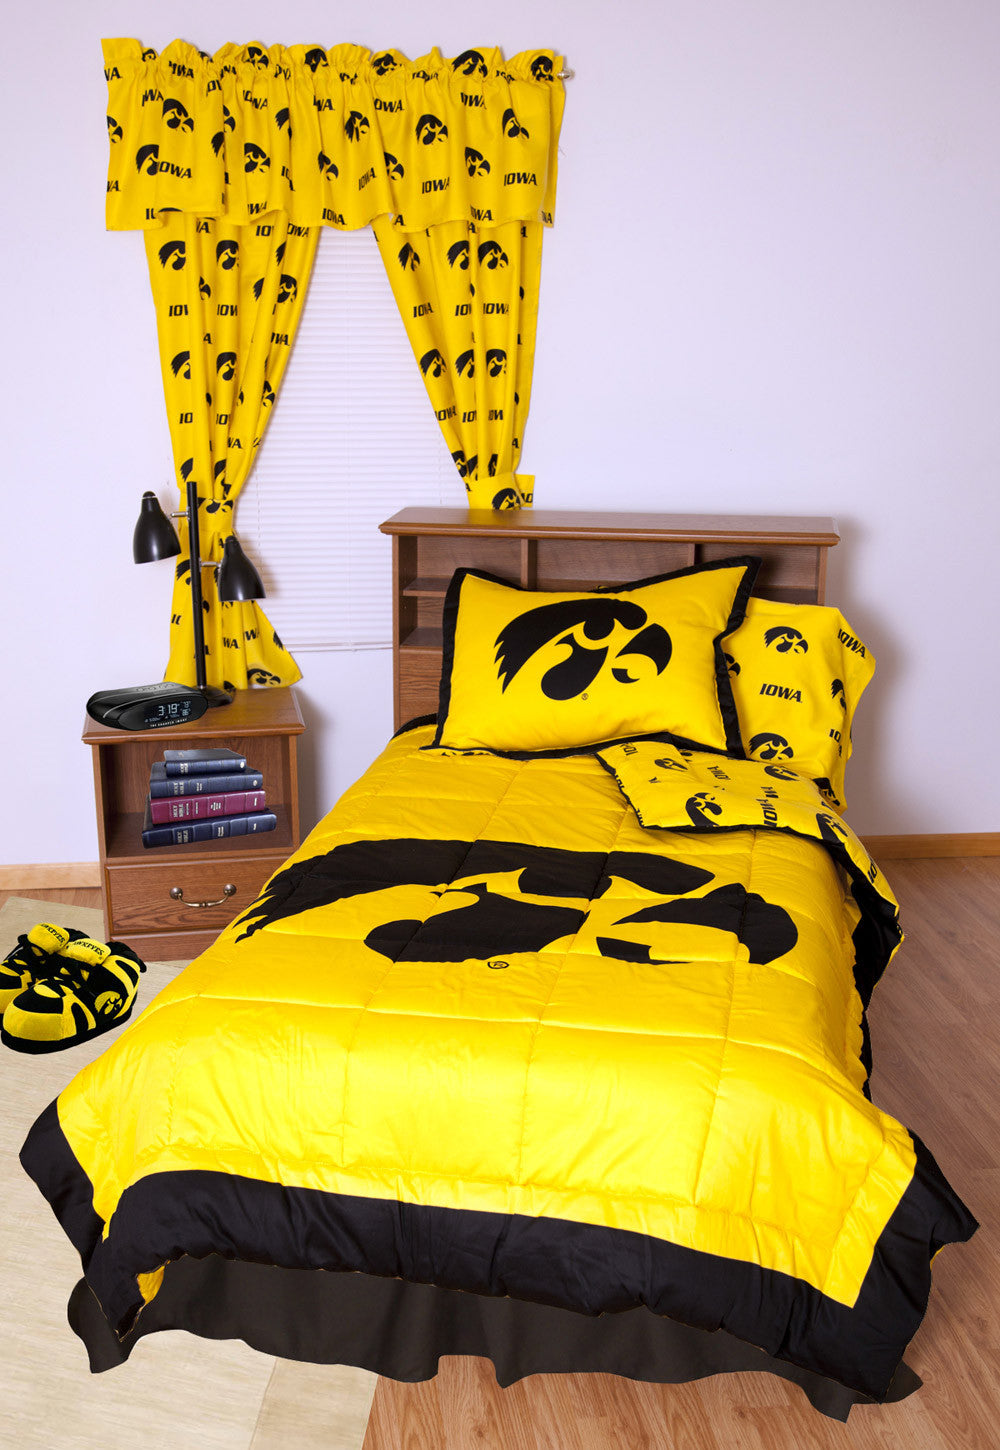 Iowa Bed In A Bag Full - With Team Colored Sheets - Iowbbfl By College Covers